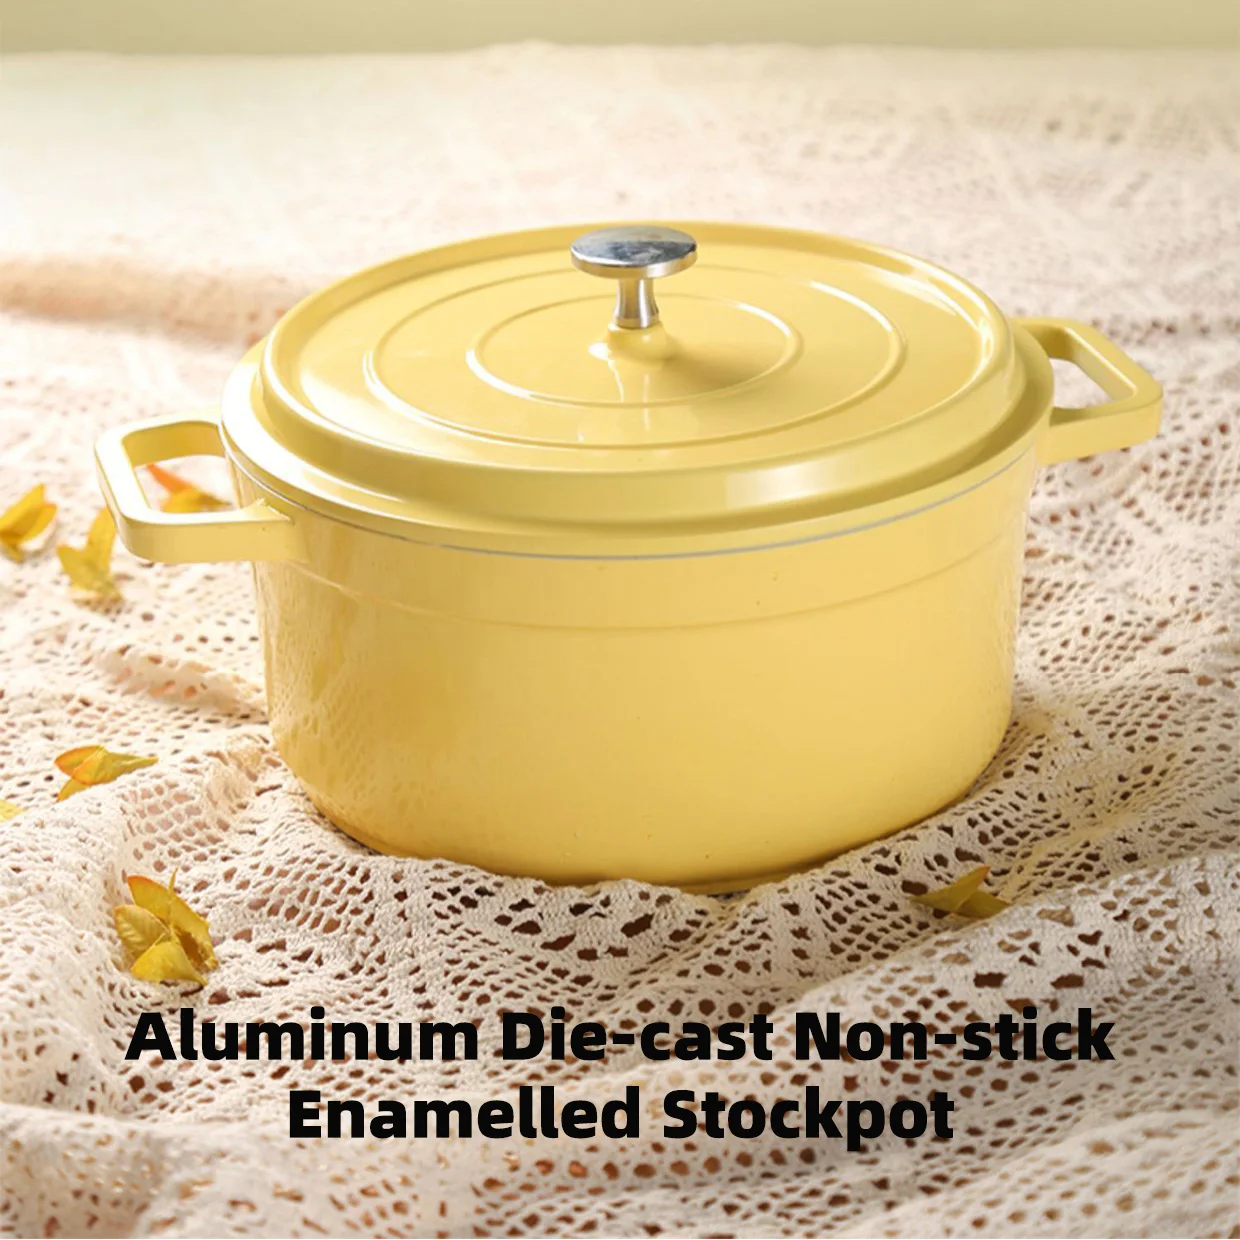 

Ceramic Enamel Stock Pot With Lid Non-stick Saucepan Casserole Nonstick Toxin Free Gather Energy Heat Preservation Gas Induction